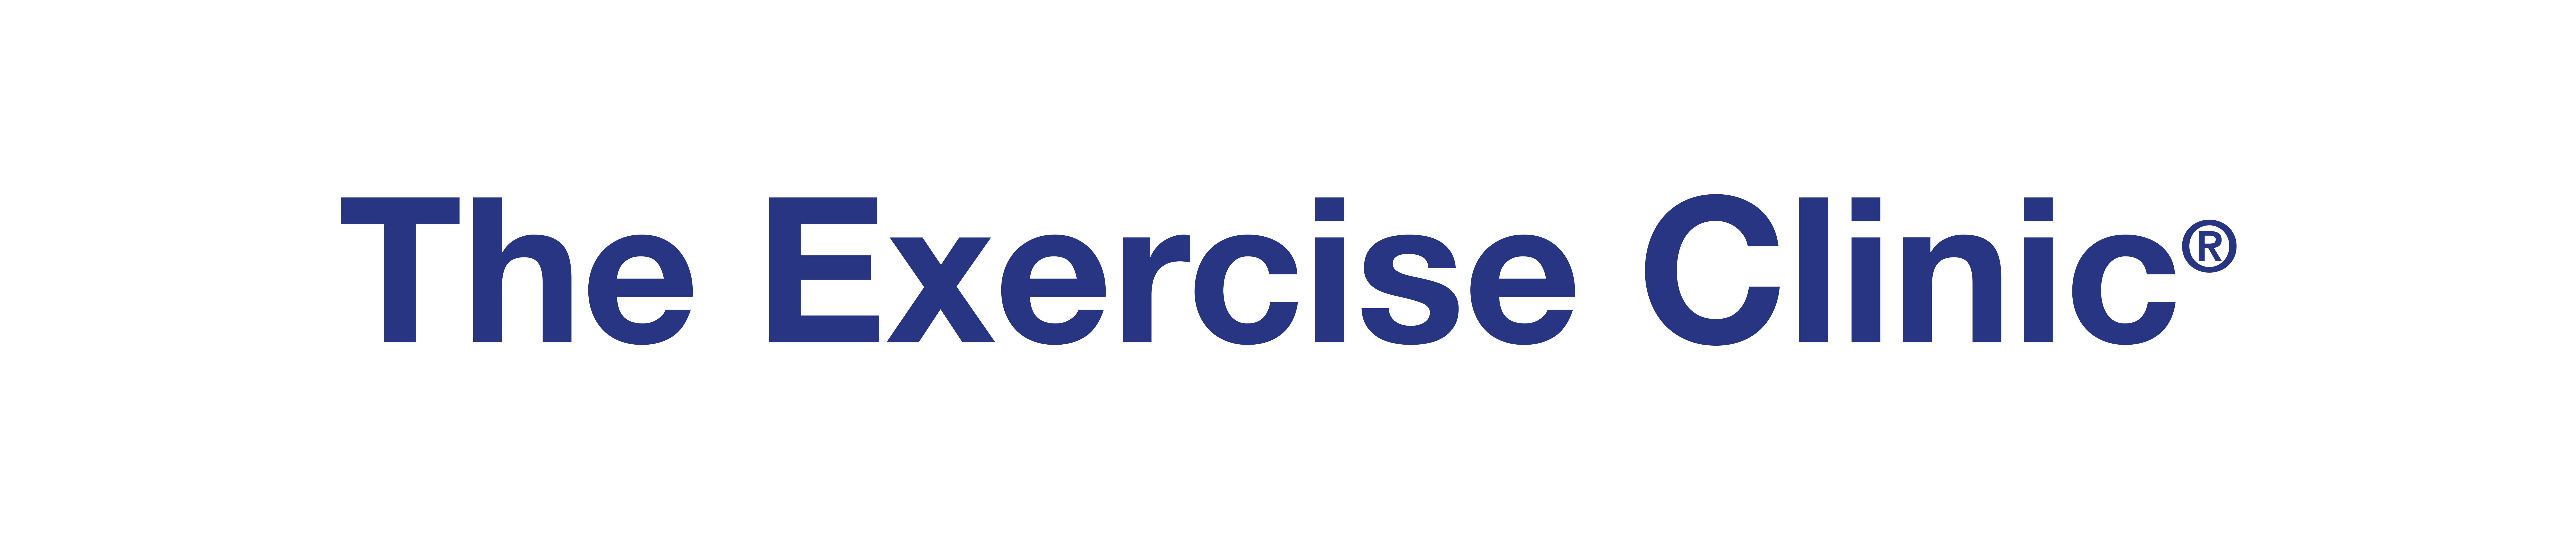 The Exercise Clinic logo